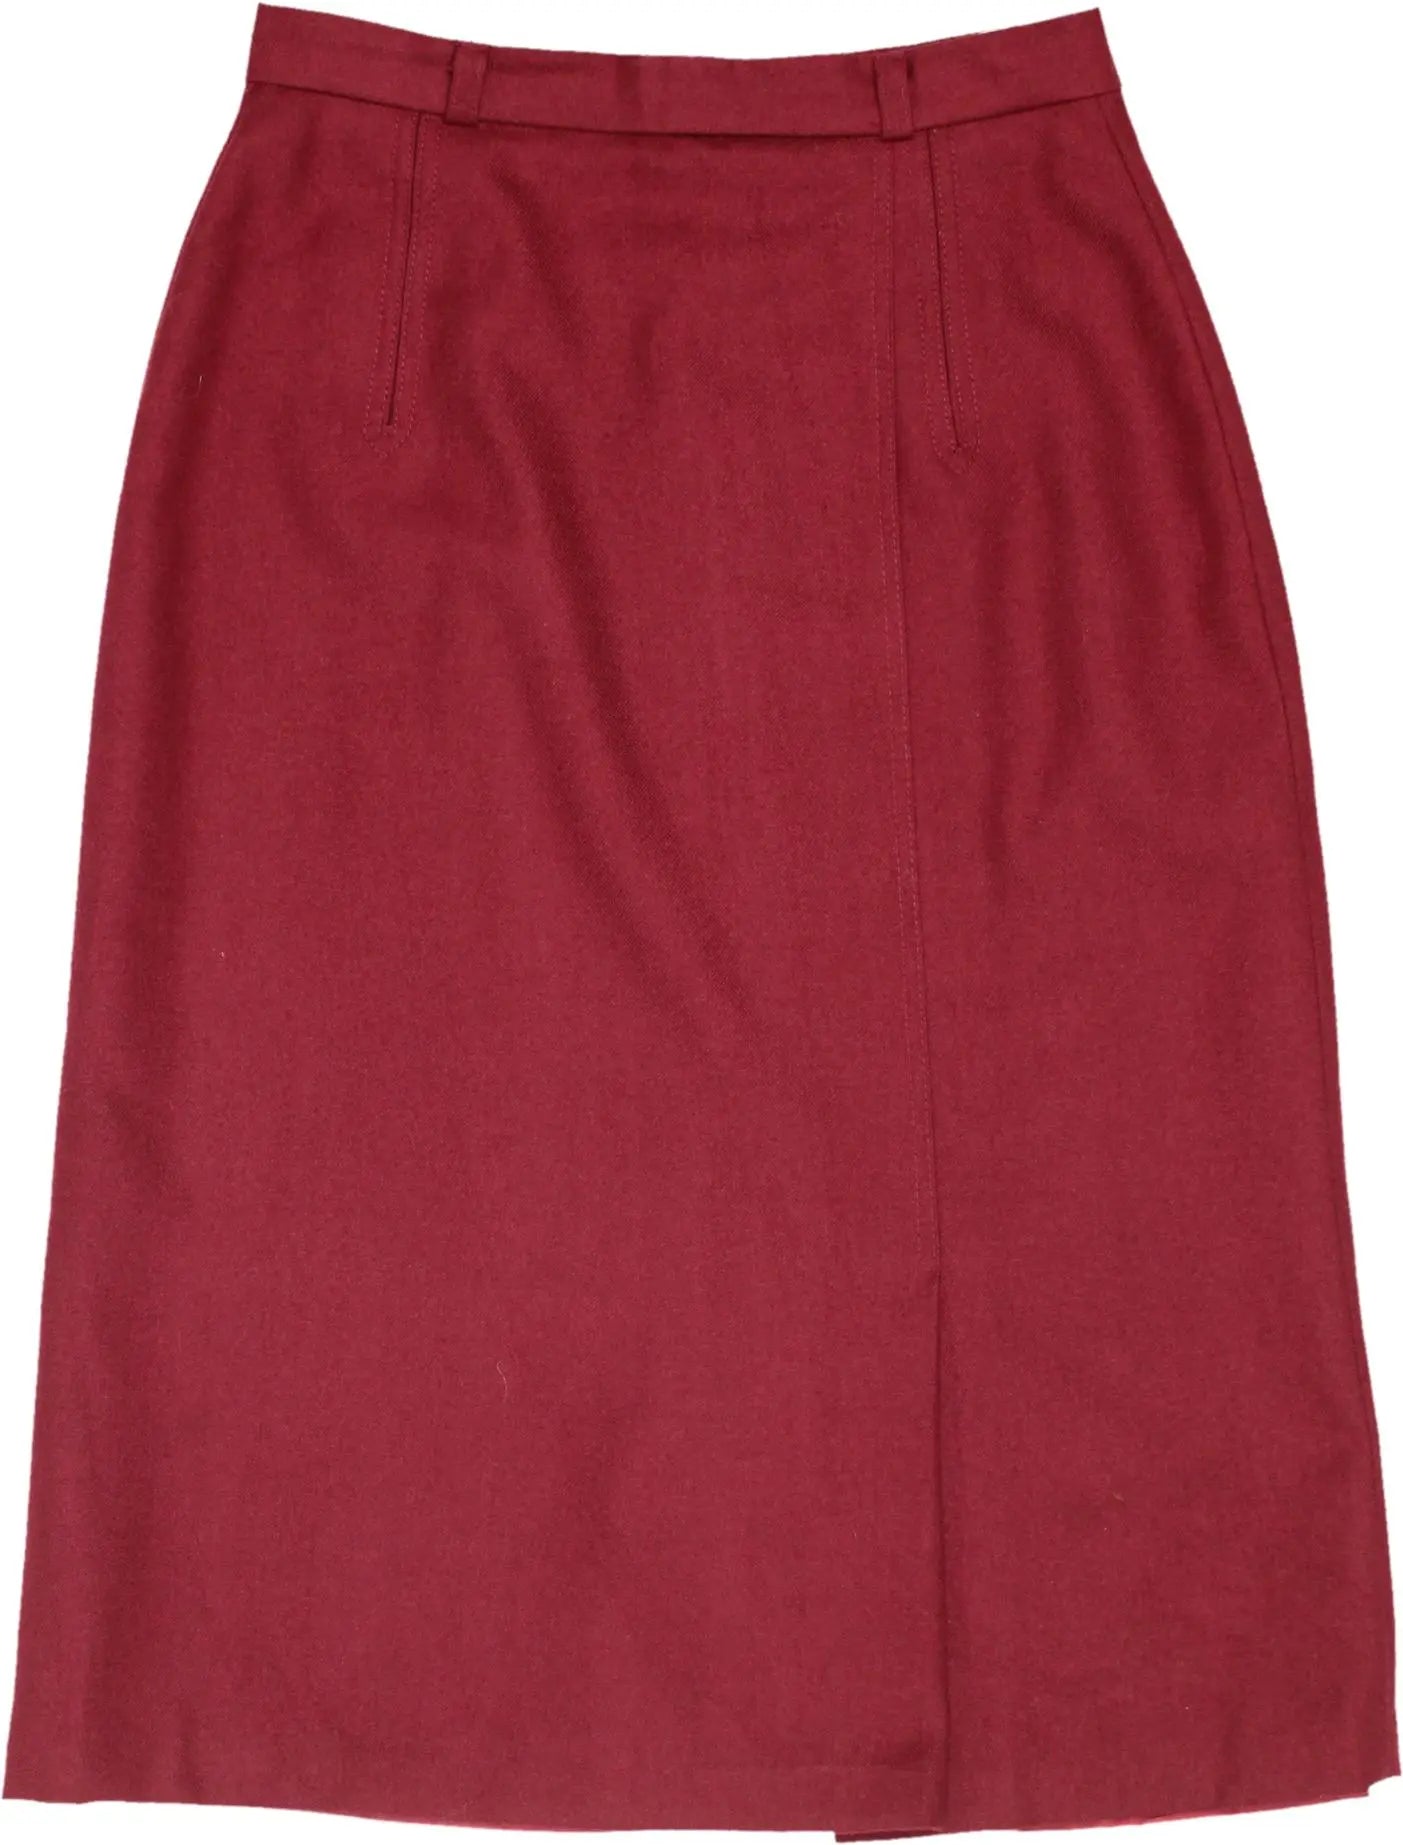 Unknown - Red pencil skirt- ThriftTale.com - Vintage and second handclothing